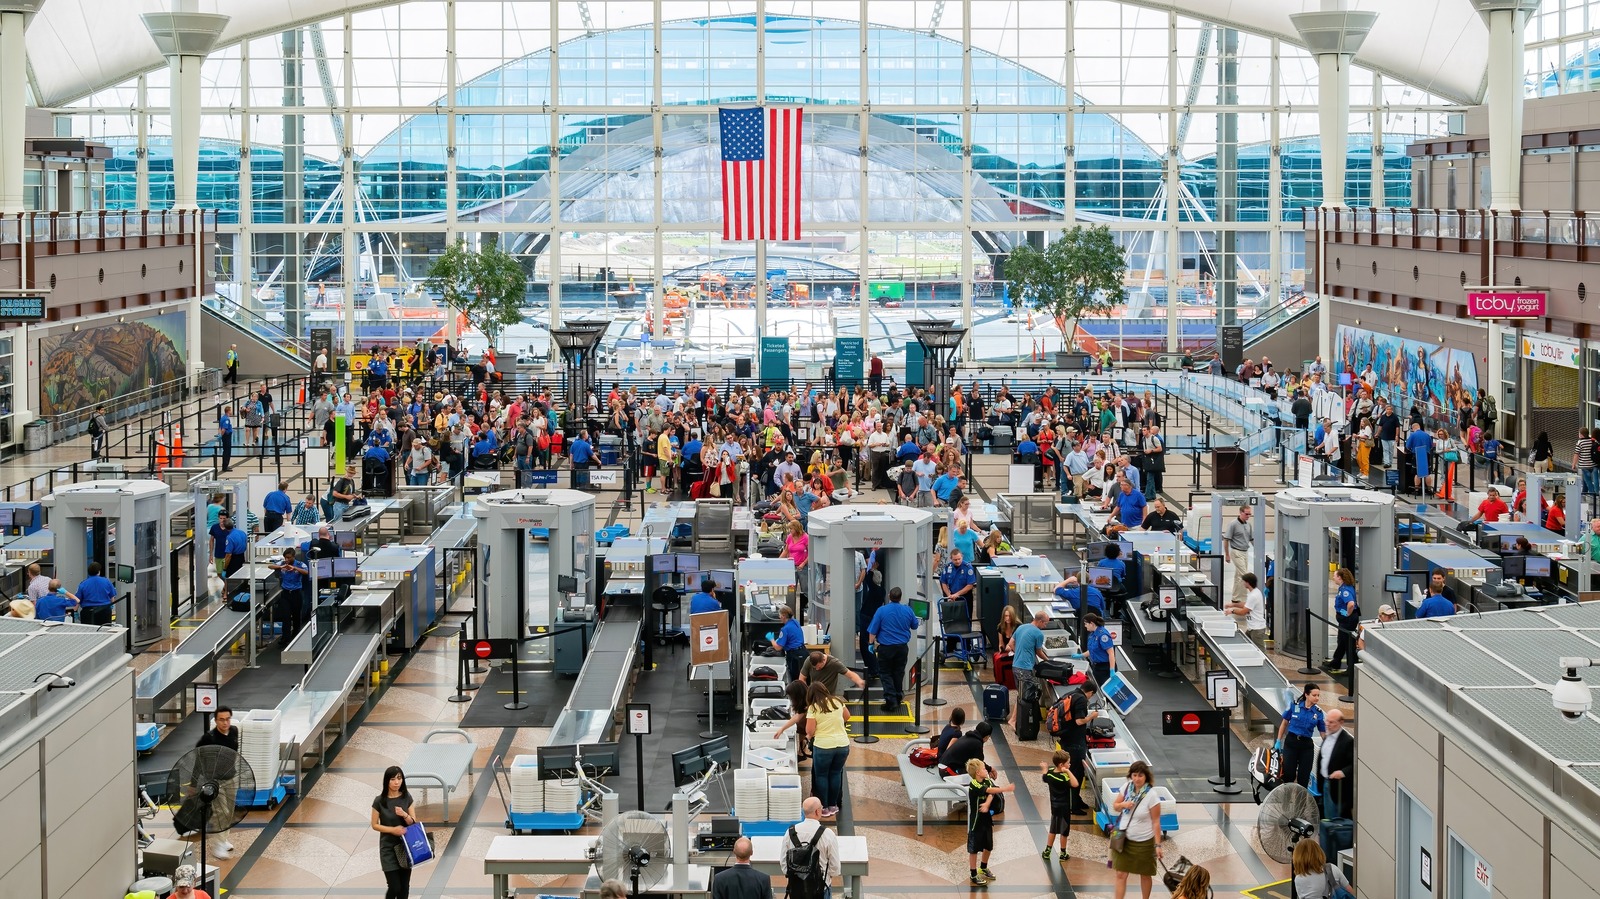 https://www.explore.com/img/gallery/yes-you-can-bring-food-through-tsa-but-there-are-some-exceptions/l-intro-1688495459.jpg